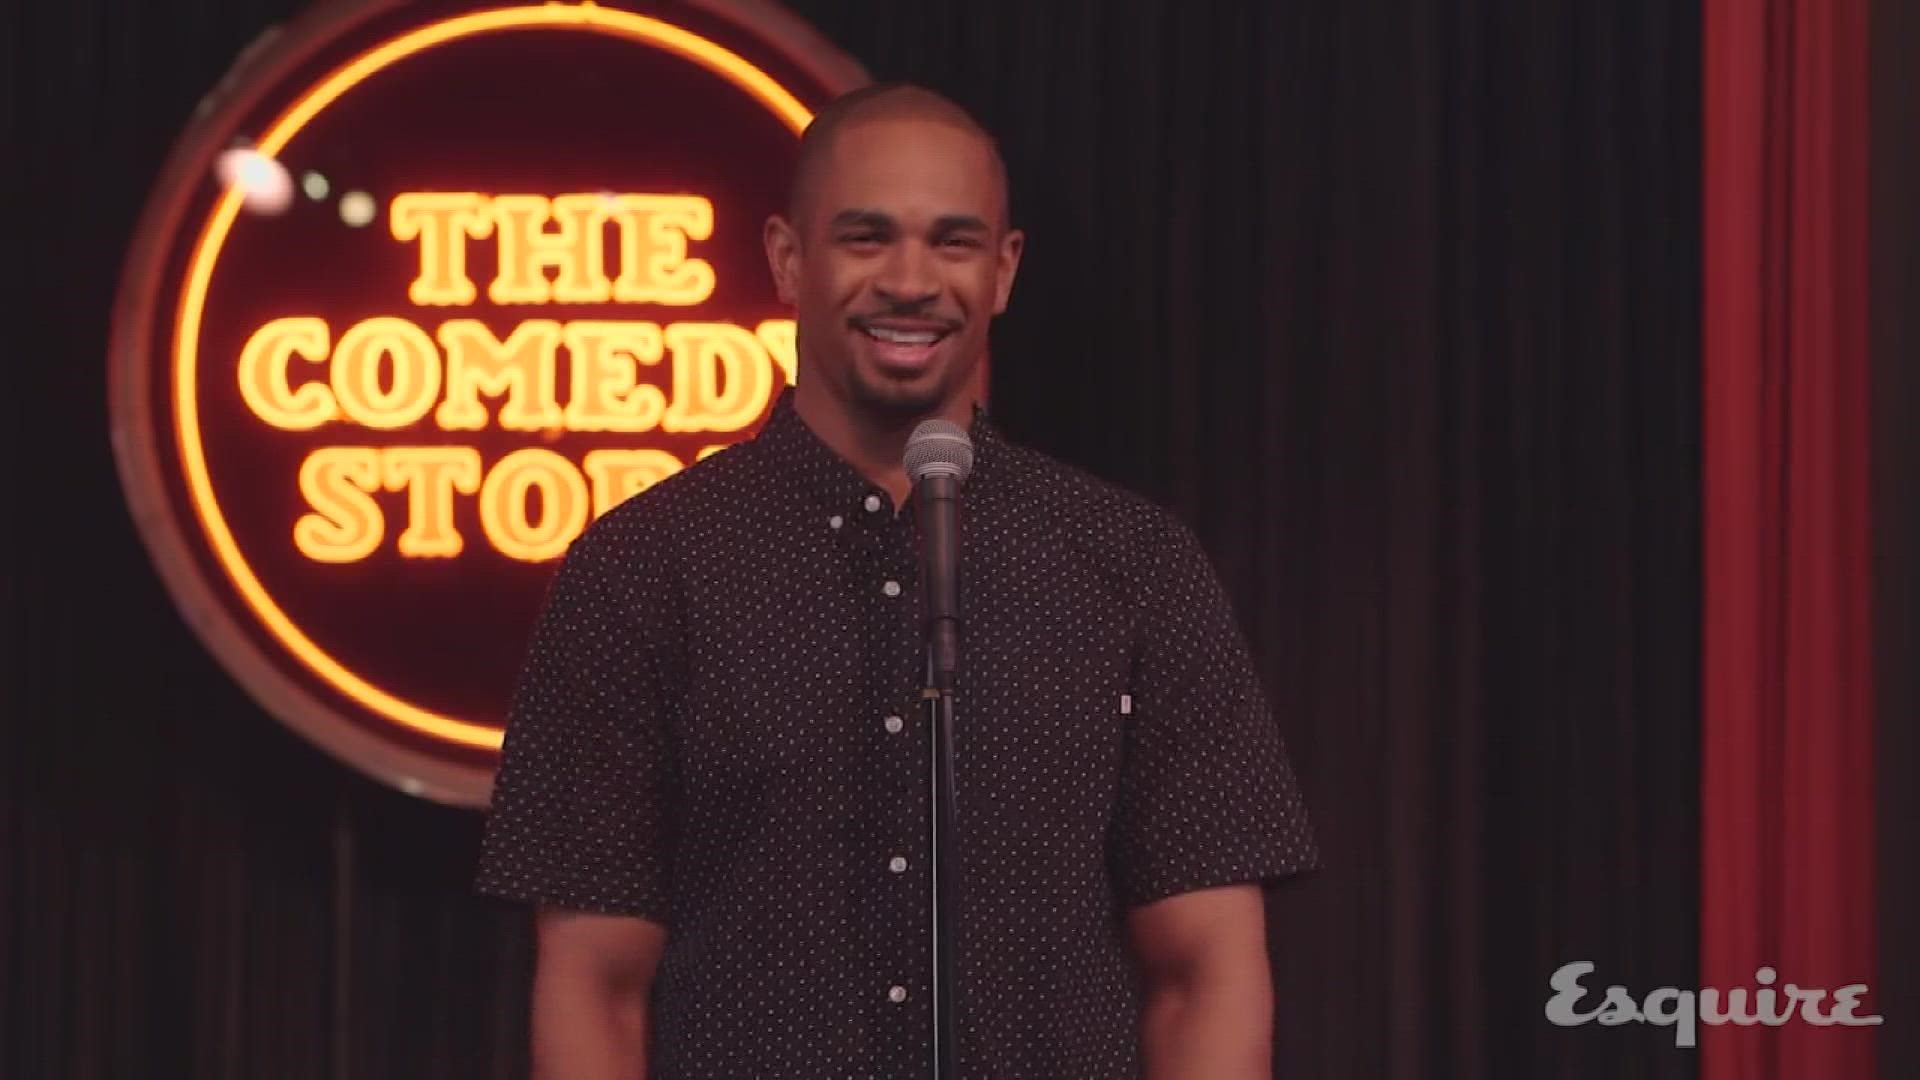 Damon Wayans Jr. gets his material from current events, family situations and observational comedy.